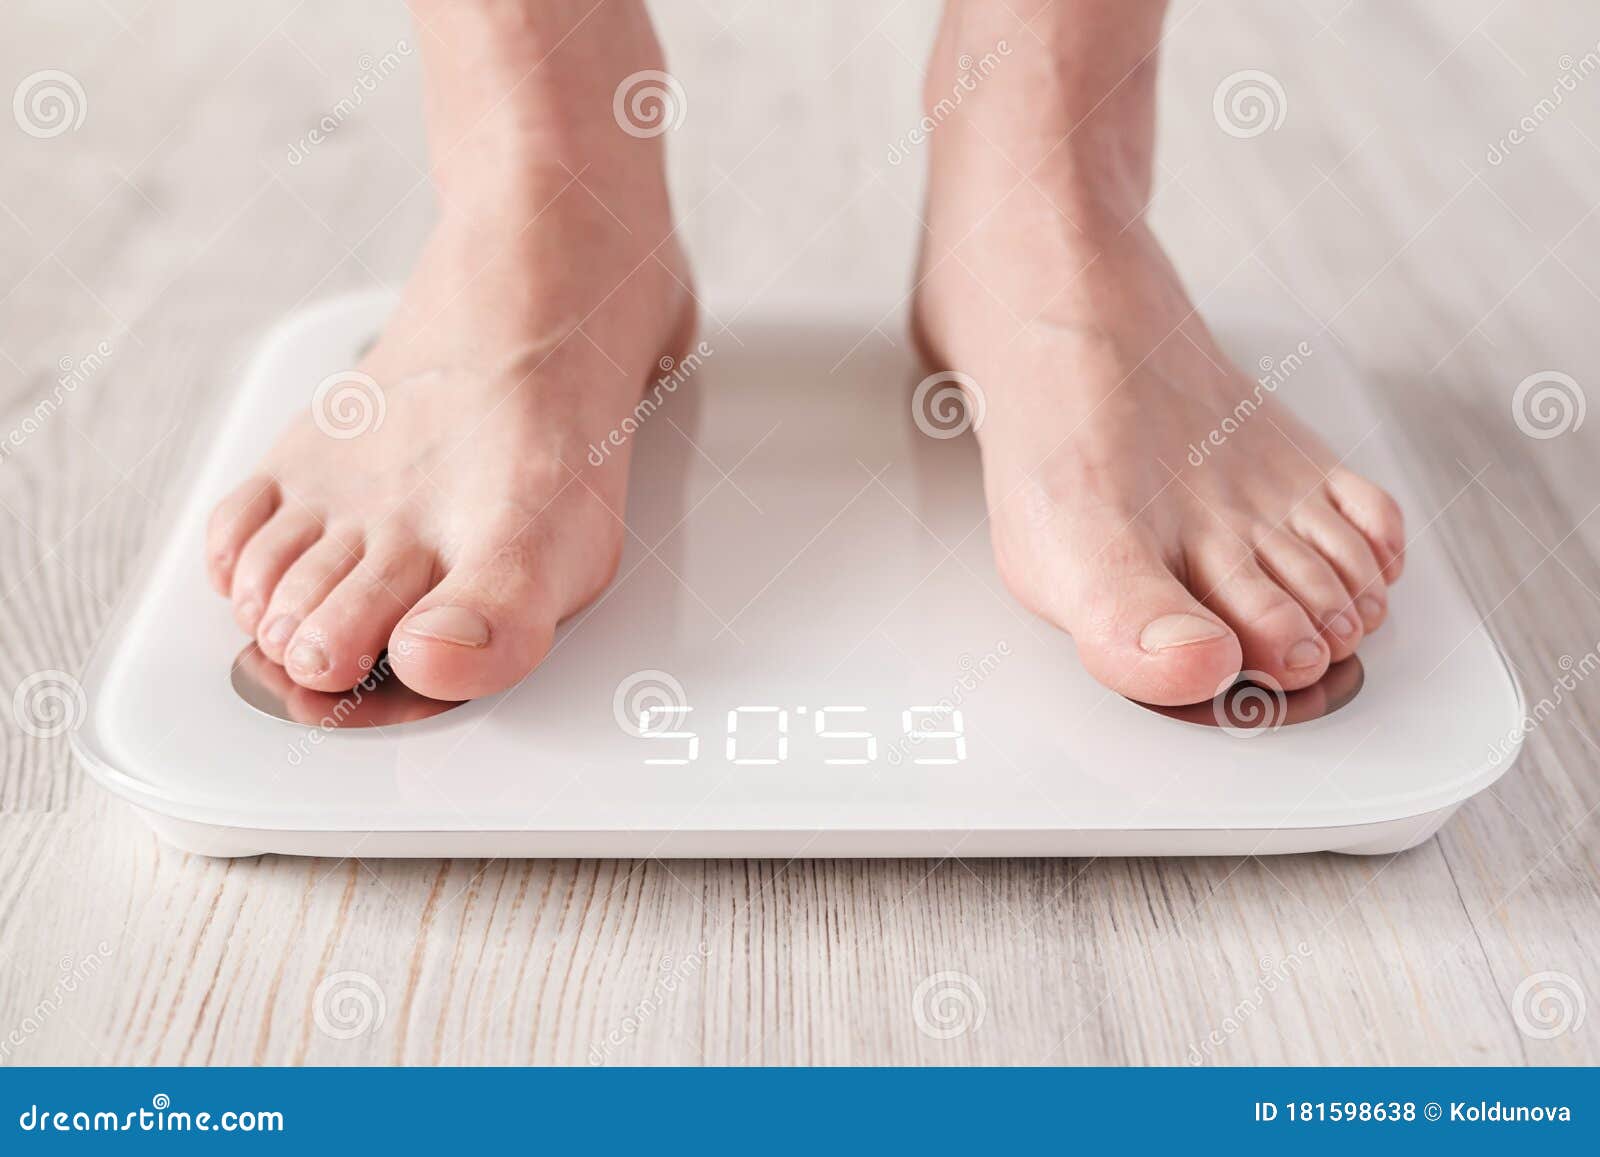 https://thumbs.dreamstime.com/z/bare-feet-stand-smart-scales-makes-bioelectric-impedance-analysis-bia-body-fat-measurement-bare-feet-stand-smart-scales-181598638.jpg